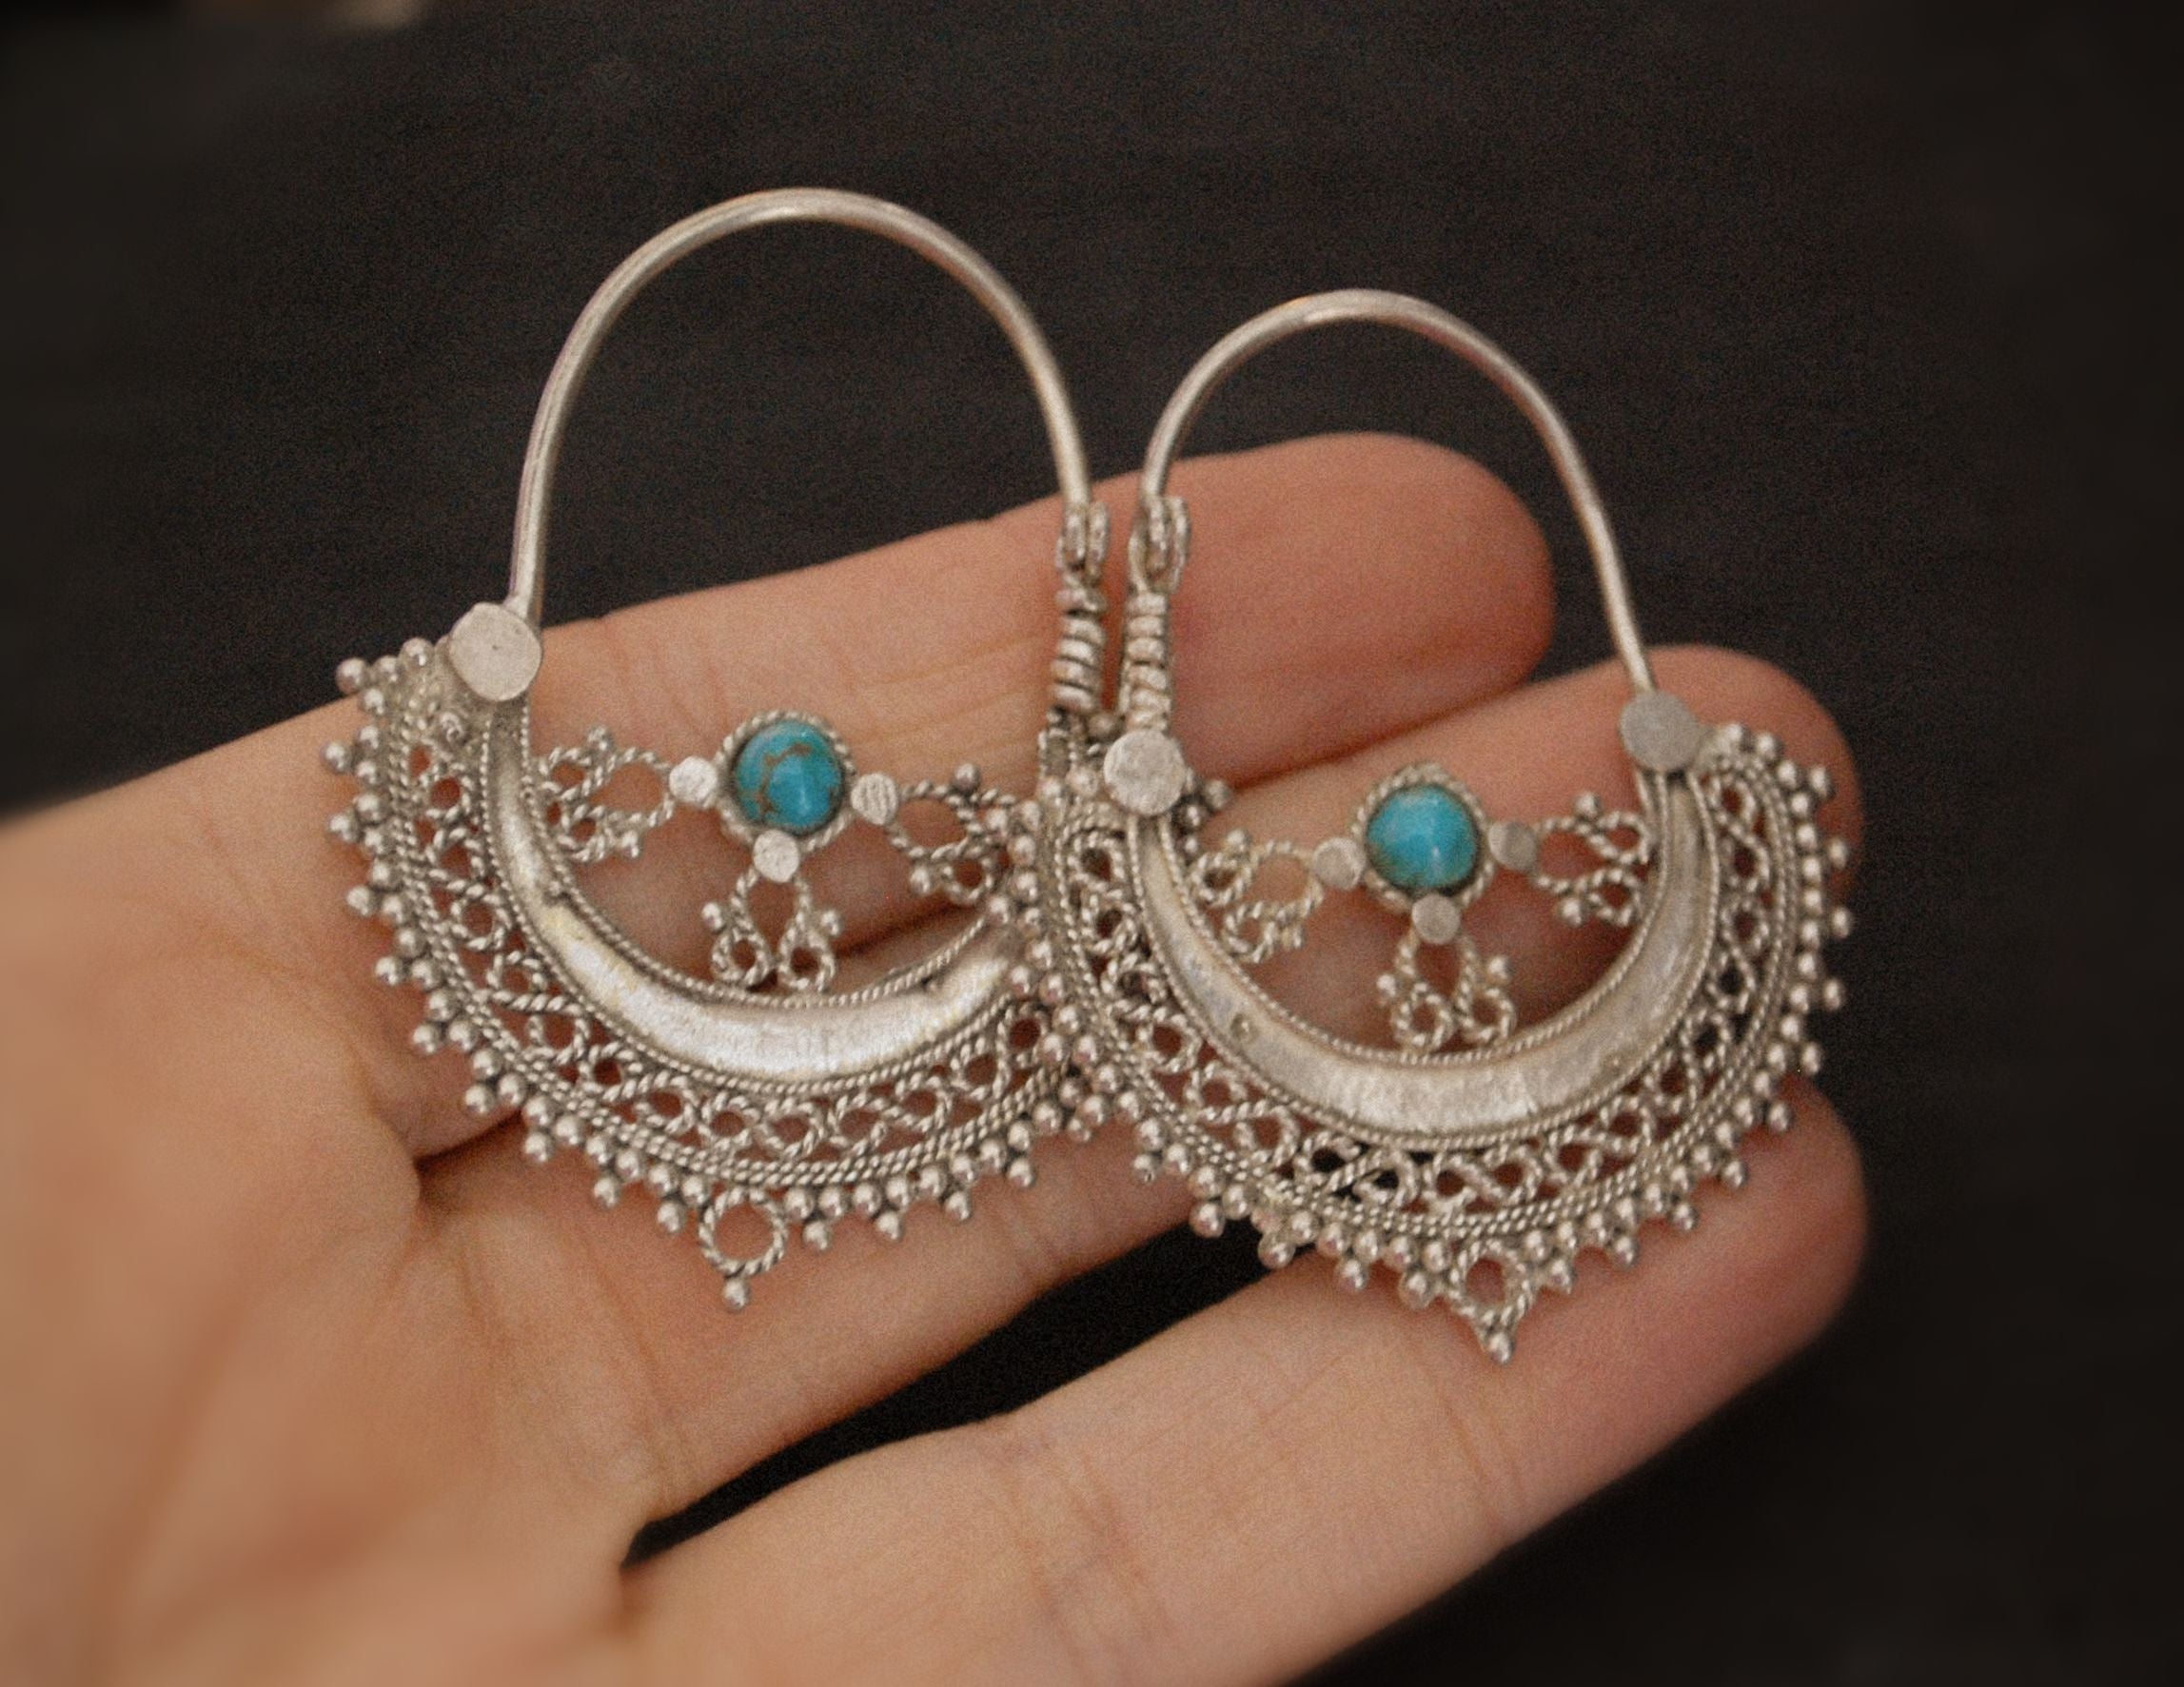 Antique Afghani Hoop Earrings with Turquoise